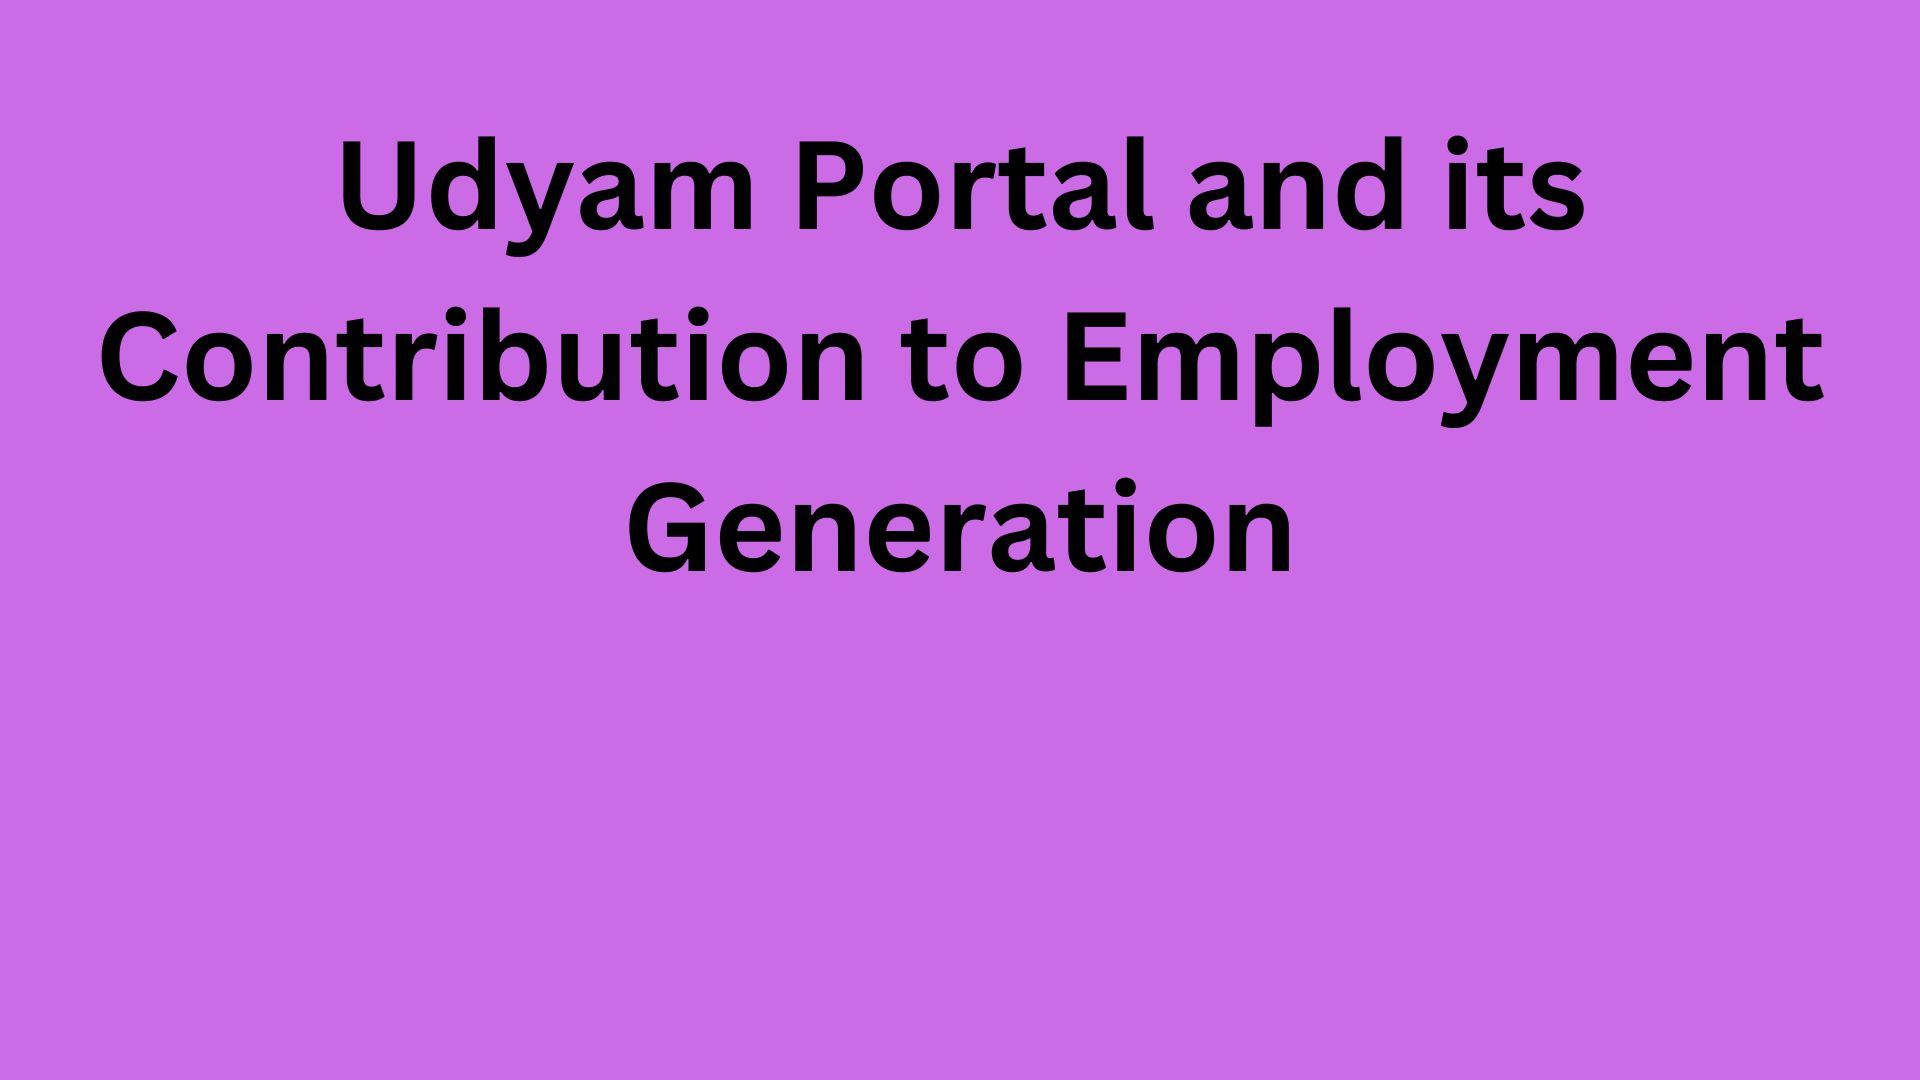 Udyam Portal and its Contribution to Employment Generation